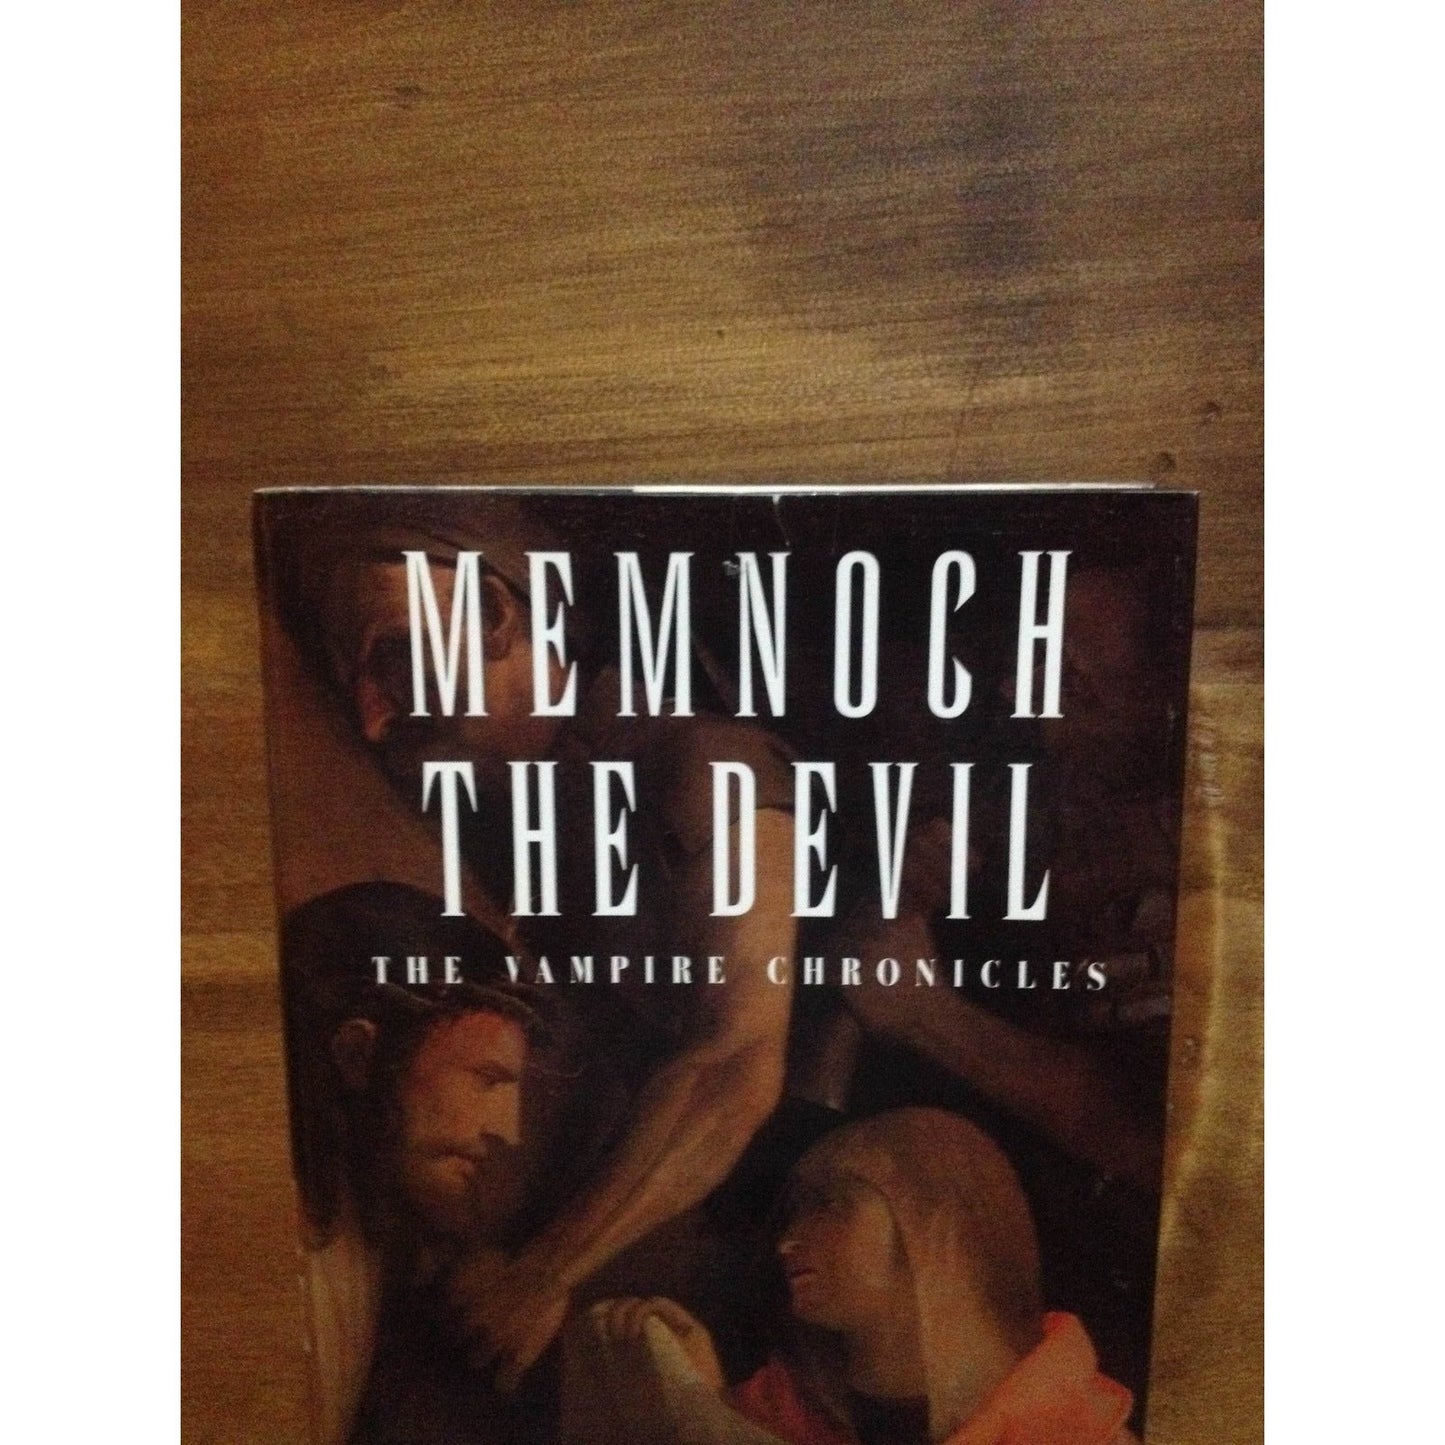 MEMNOCH THE DEVIL THE VAMPIRE CHRONICLES  BY: ANNE RICE BooksCardsNBikes